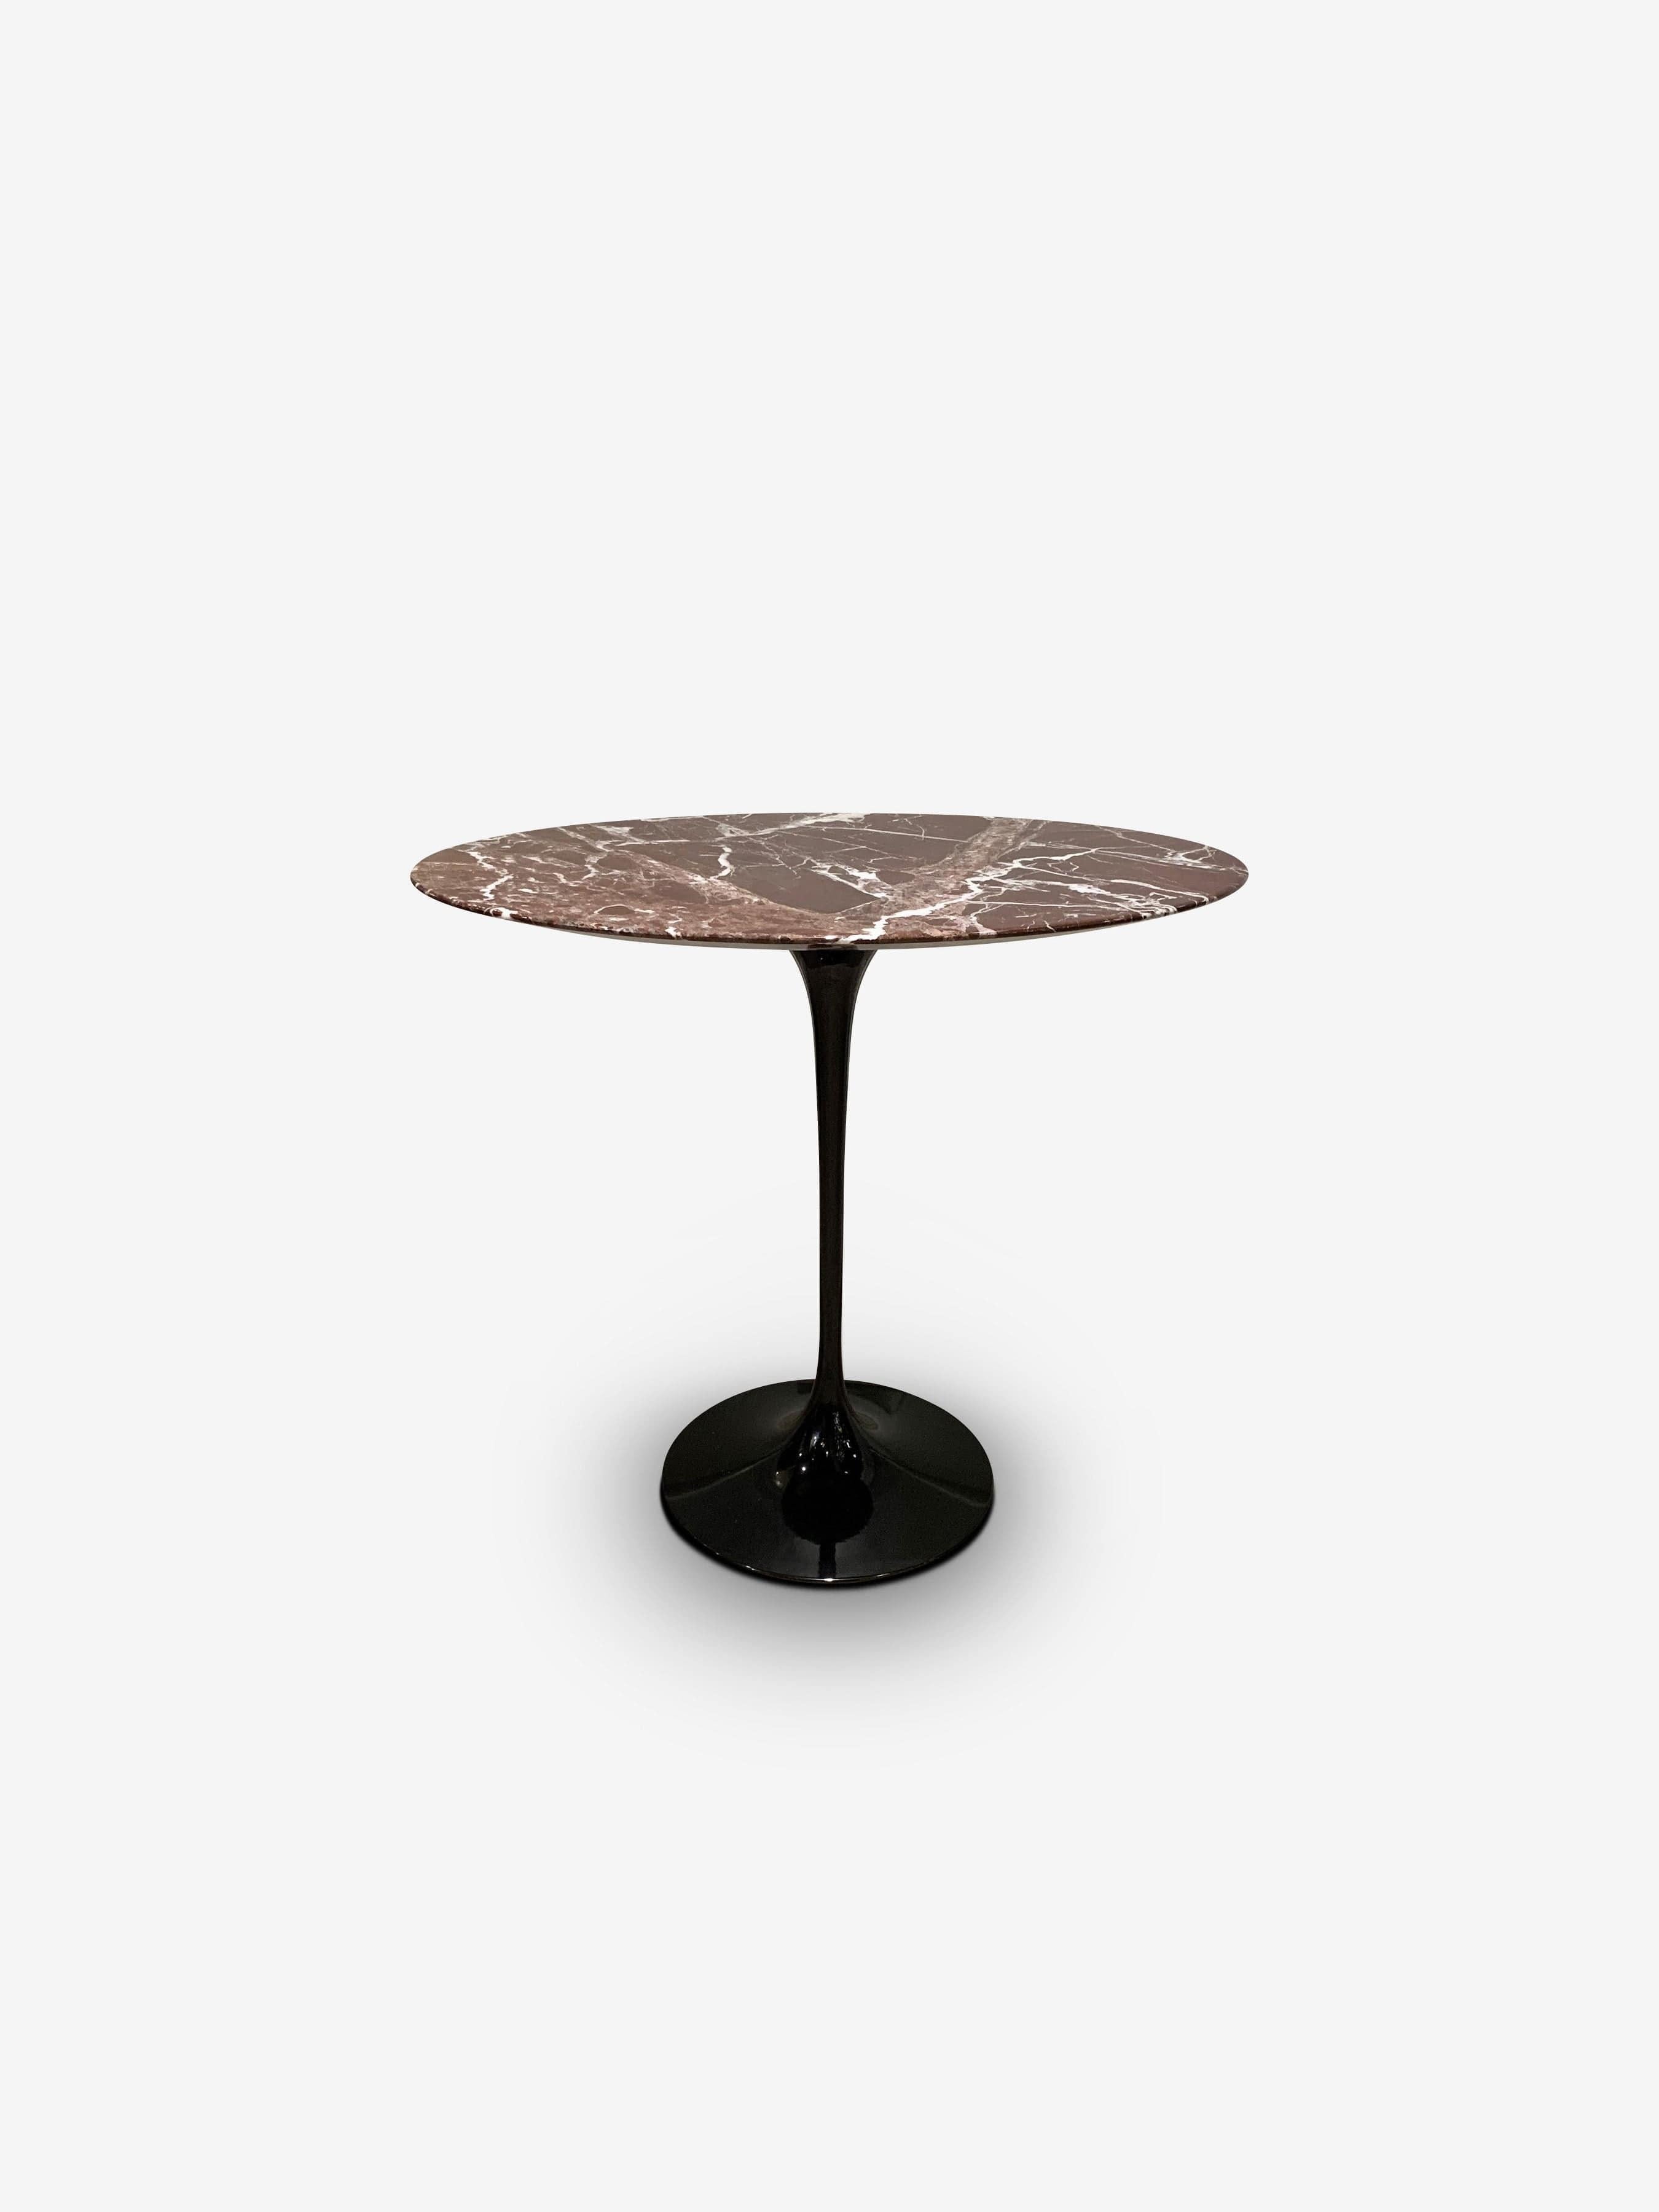 American Eero Saarinen Oval Side Table with Rosso Rubino Polished Marble and Black Base For Sale